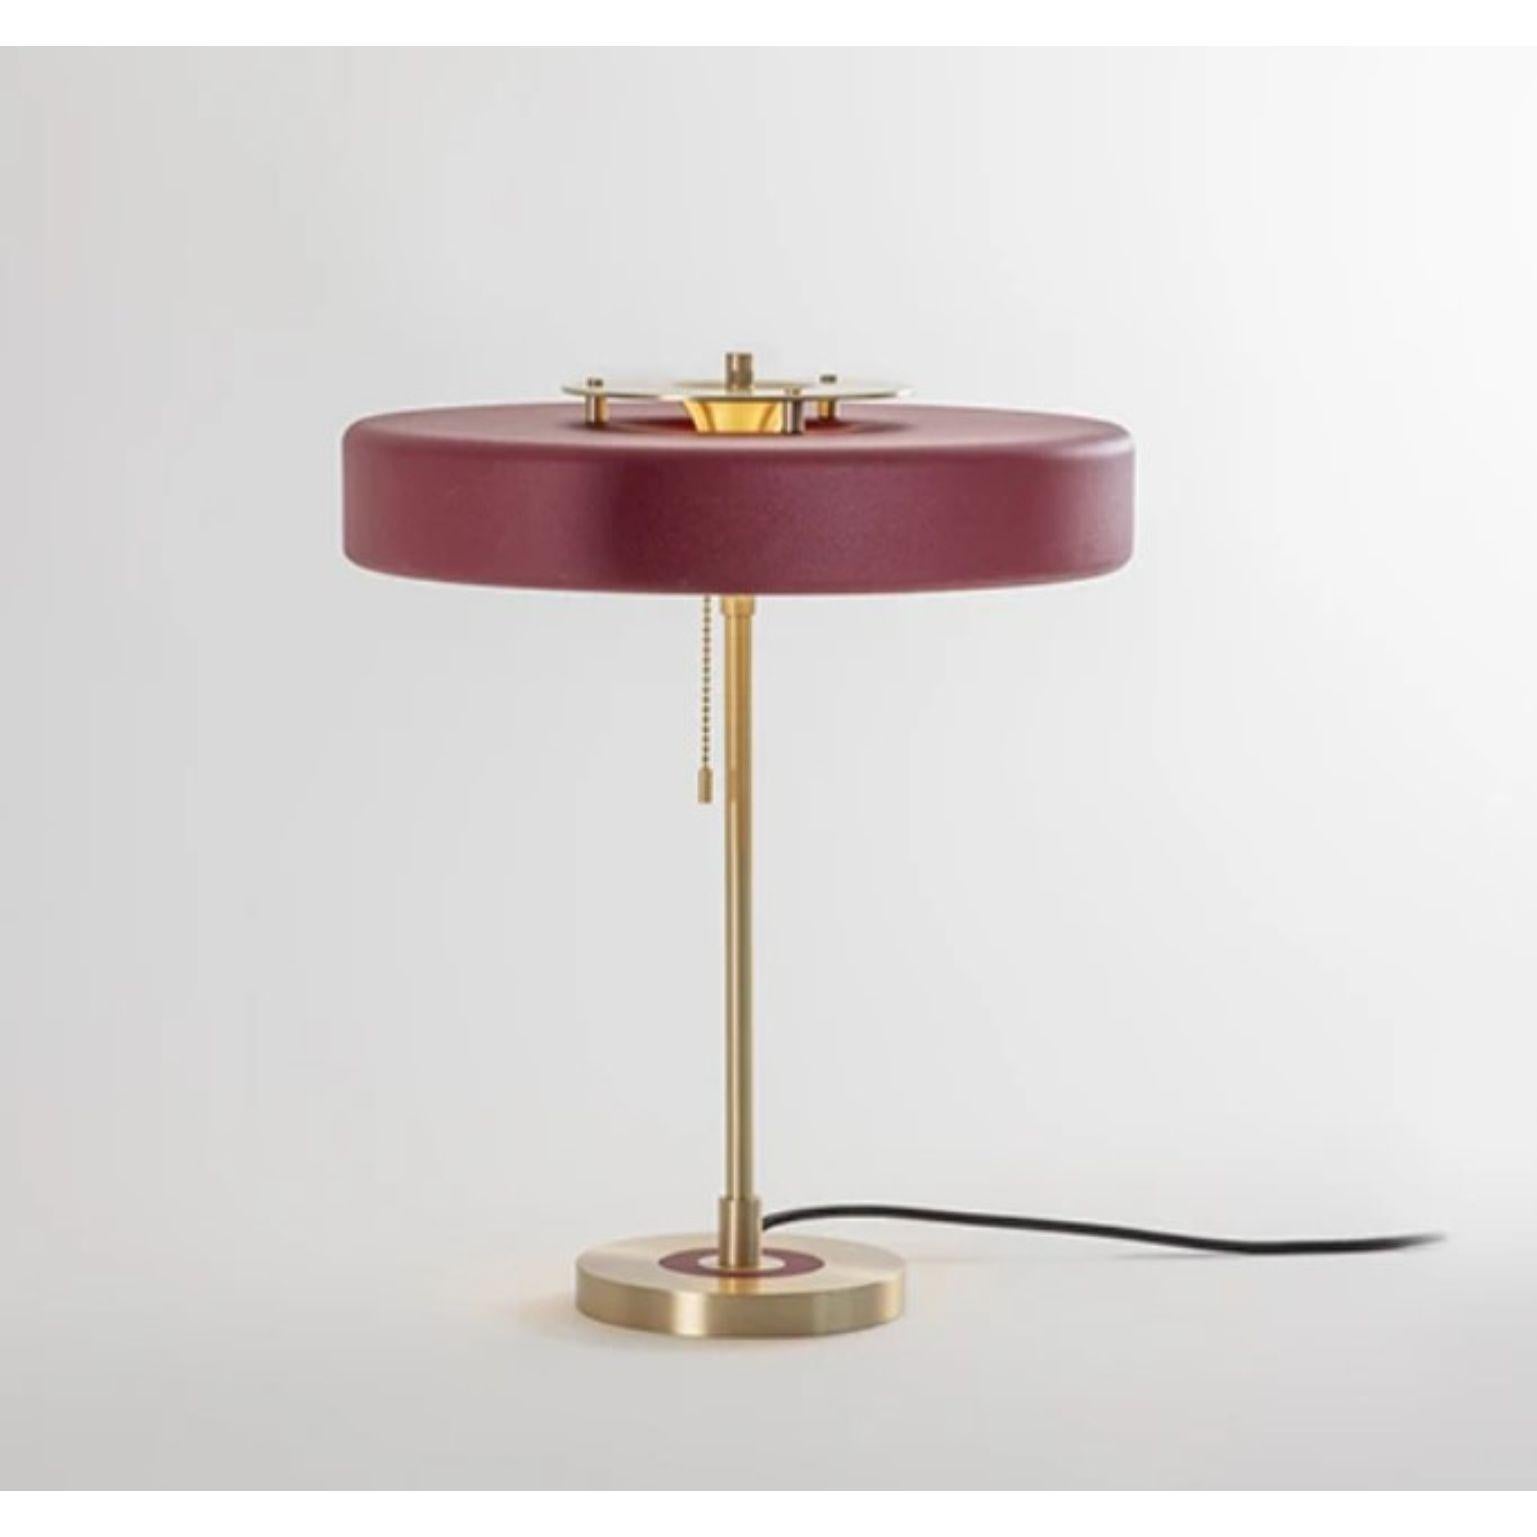 British Revolve Table Lamp, Brushed Brass, Oxblood by Bert Frank